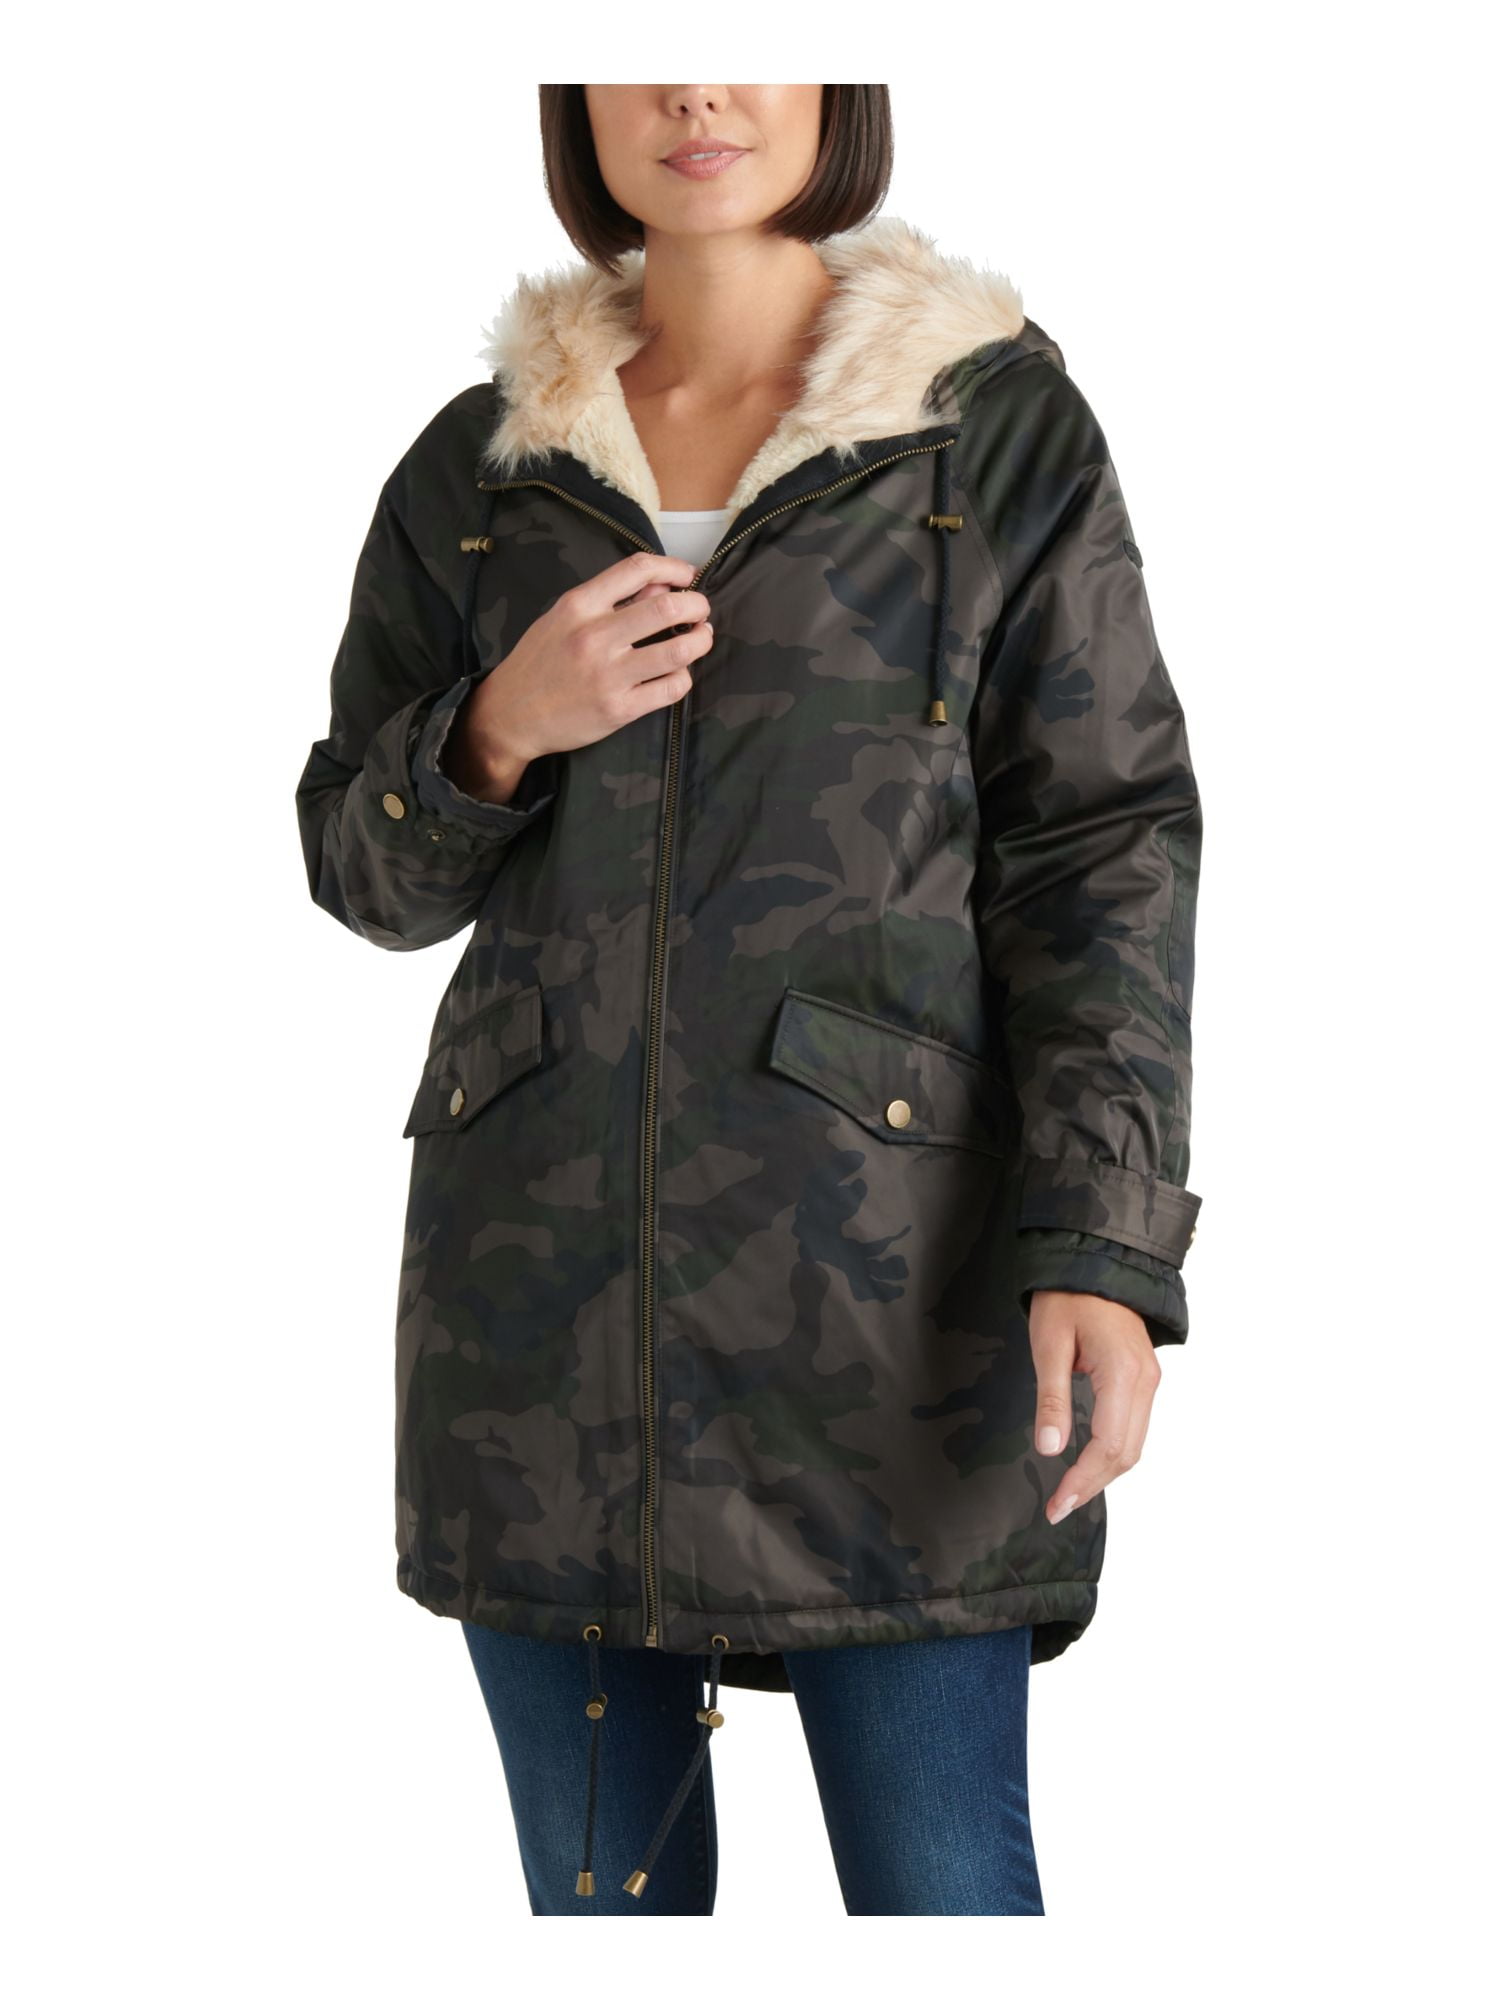 LUCKY BRAND Womens Green Faux Fur Camouflage Zip Up Winter Jacket